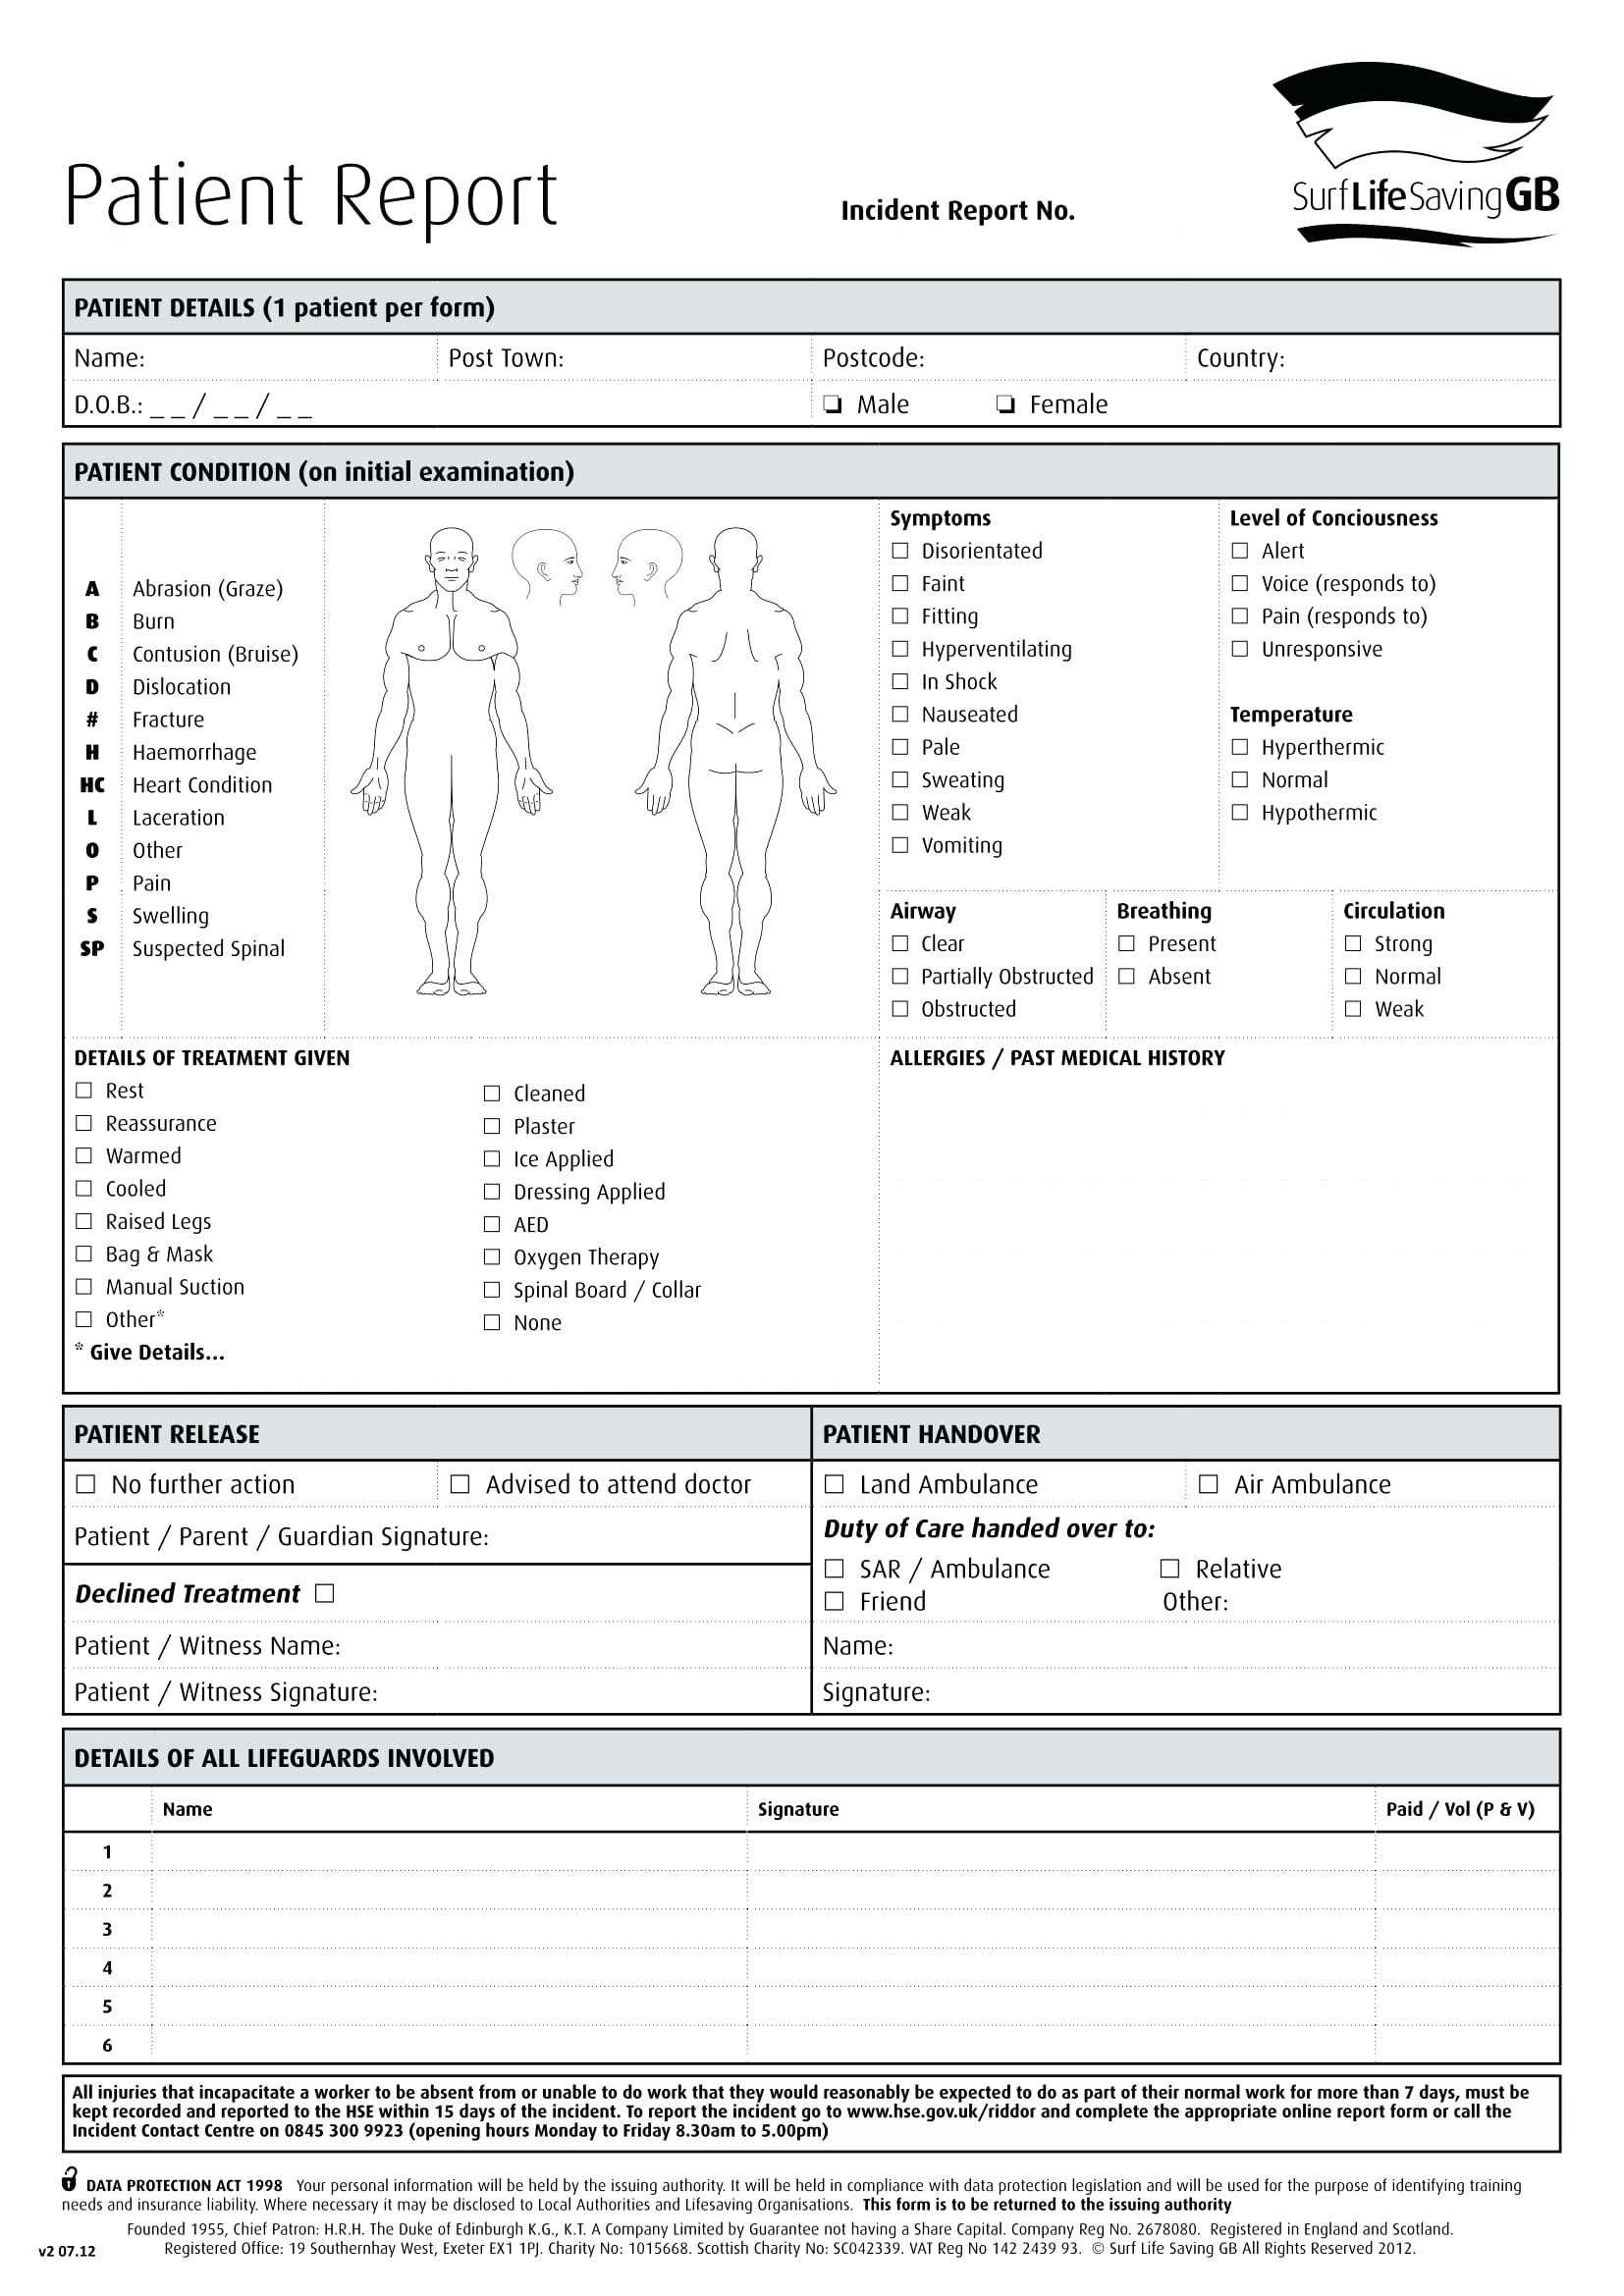 Incident Report Form Template Free Download – Vmarques In Patient Report Form Template Download